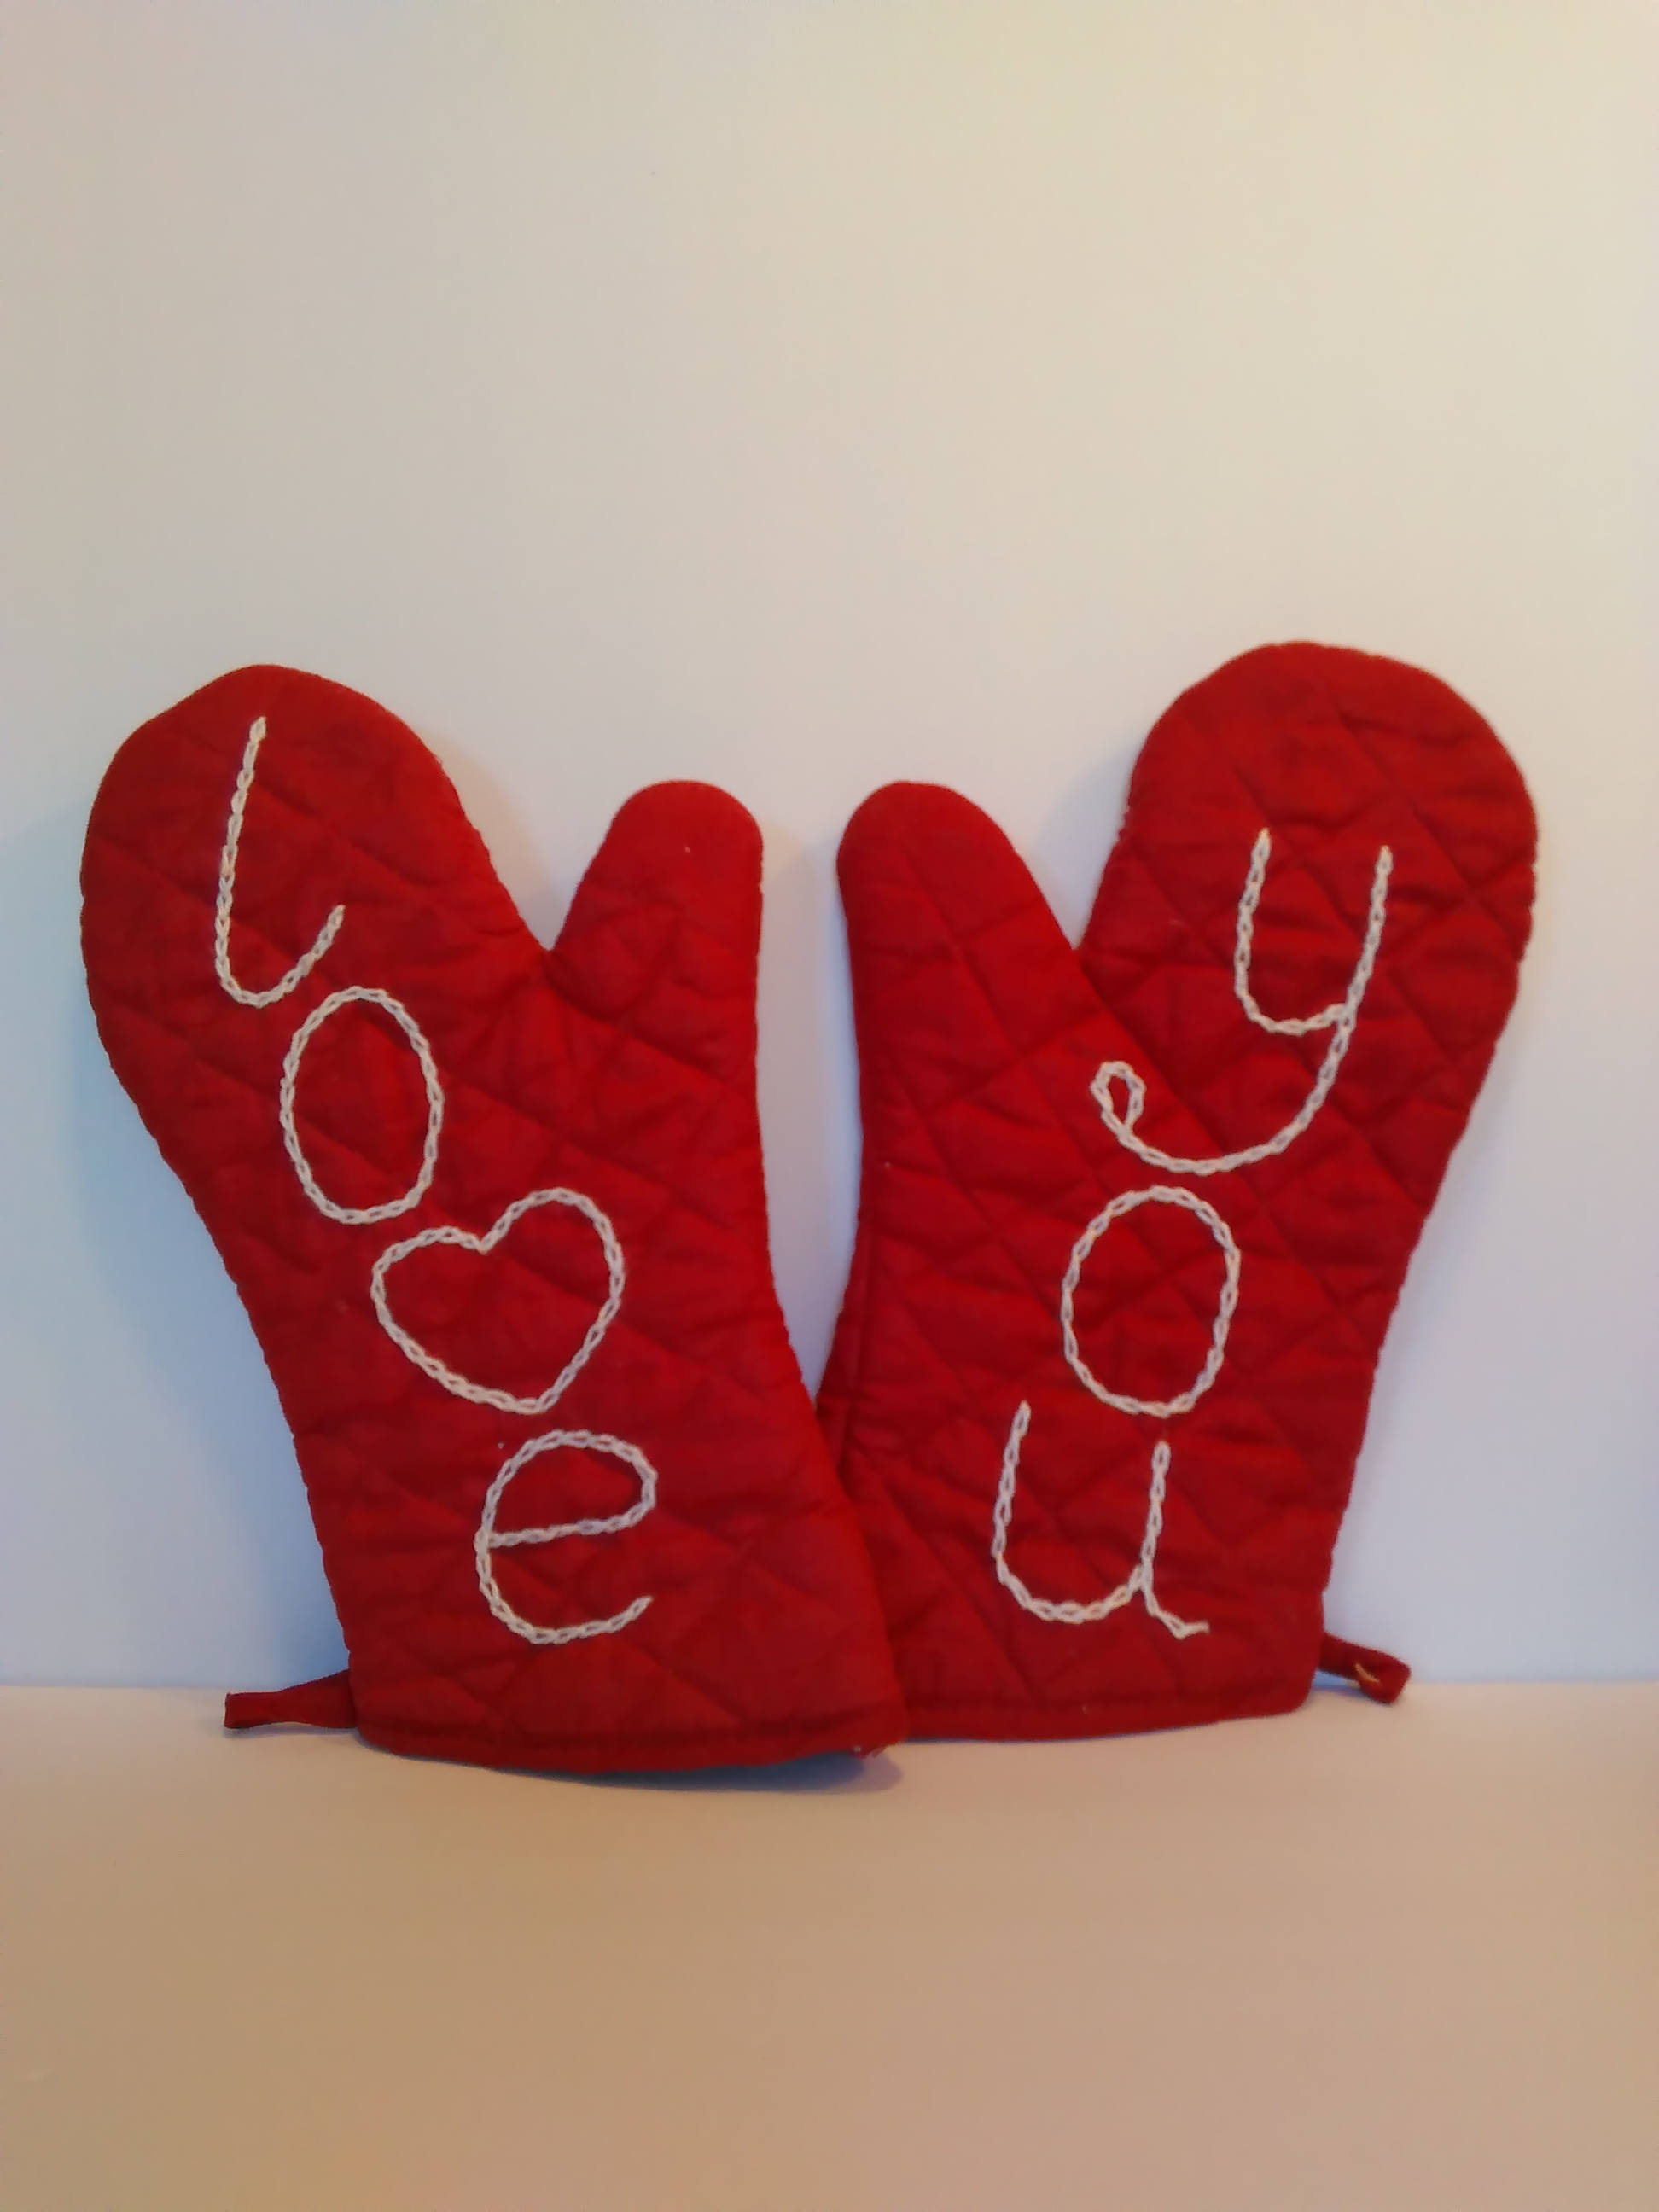 Miracu Funny Oven Mitts, Fun Pink Oven Mitt Set, Retro Kitchen Mitts -  Baking Cute Oven Mitts for Women Friend - Valentines, Unique House Warming